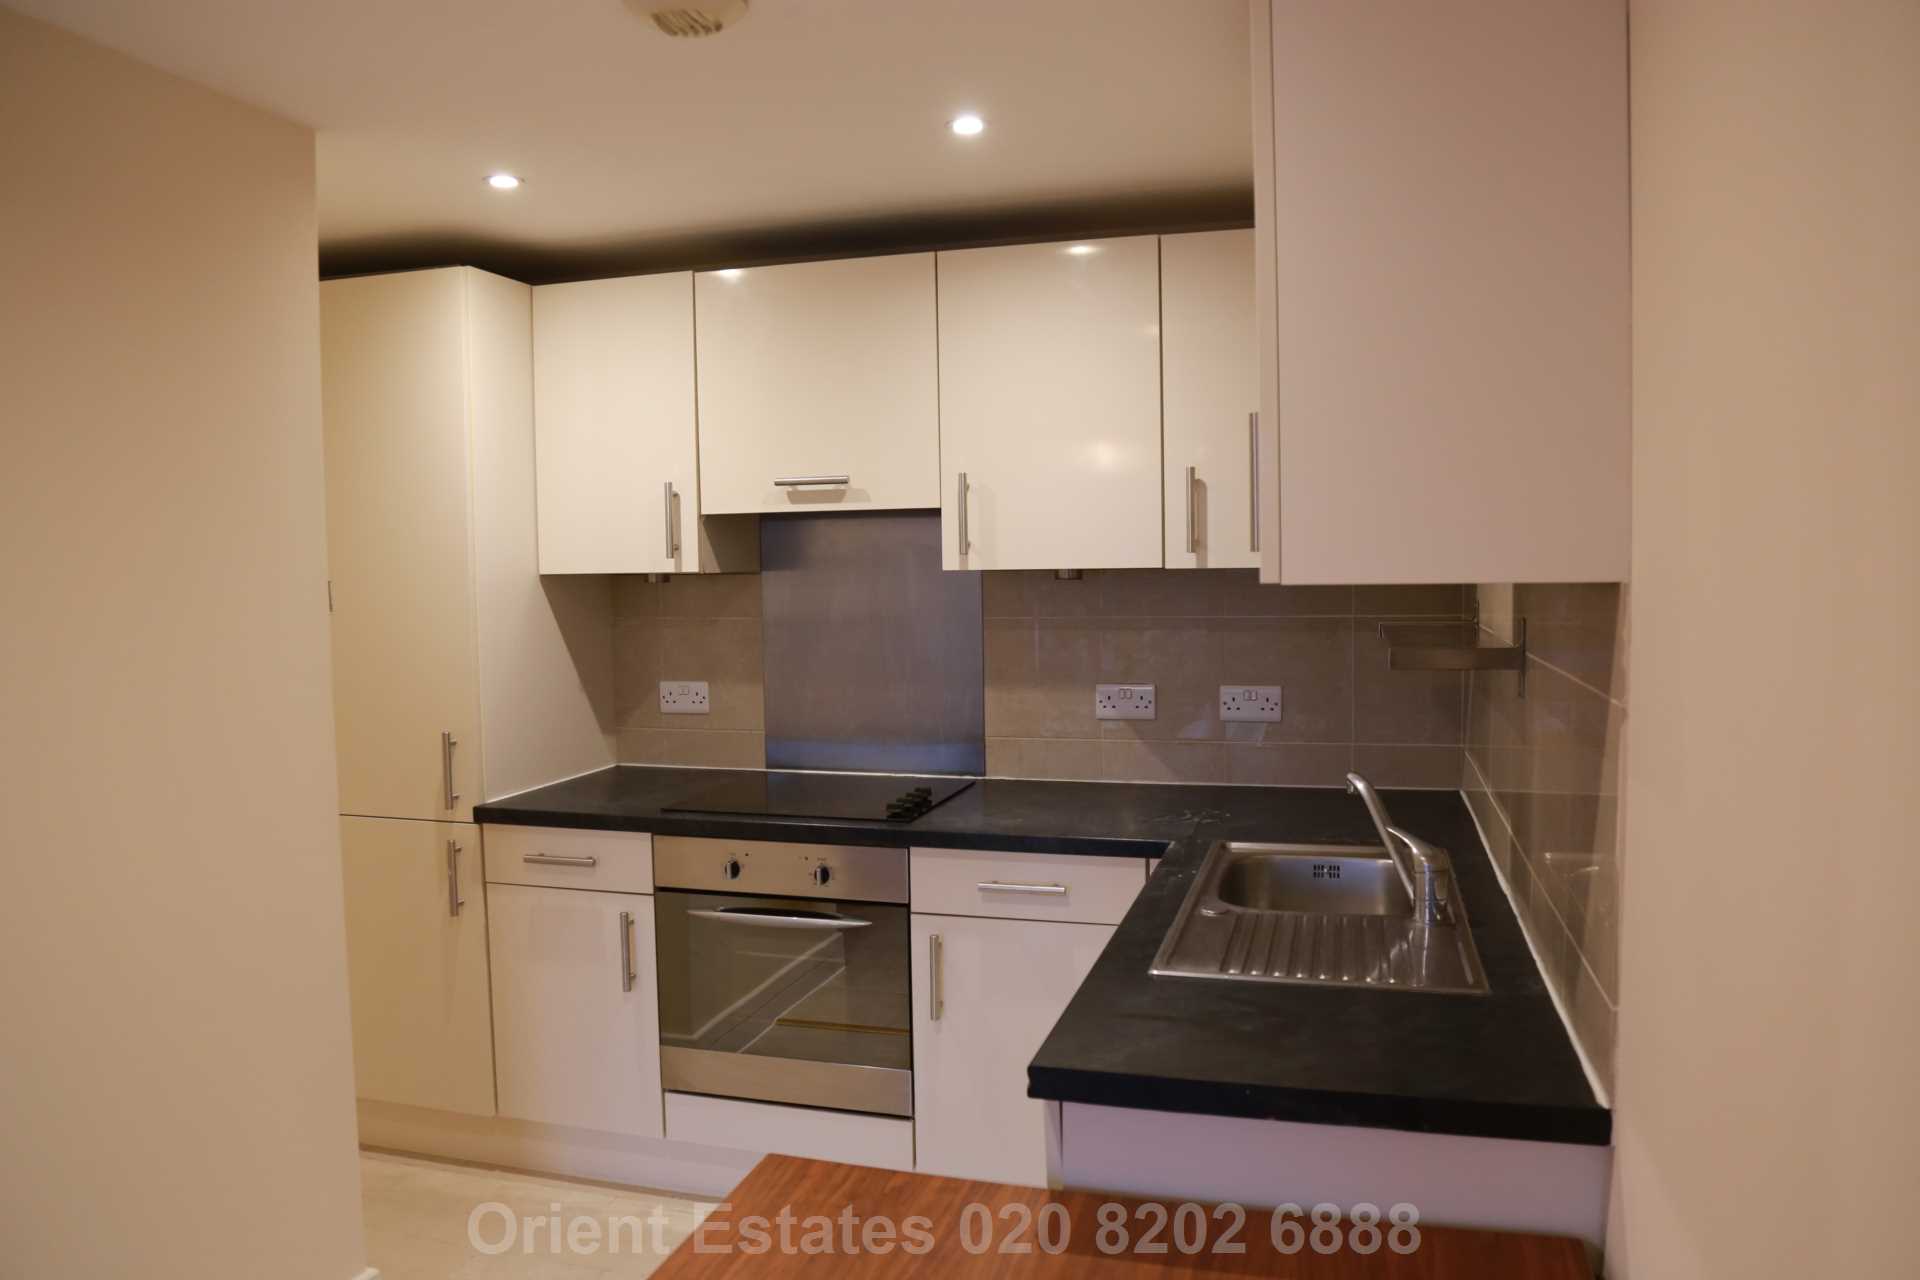 Peaberry Court, Greyhound Hill, Hendon, NW4, Image 6